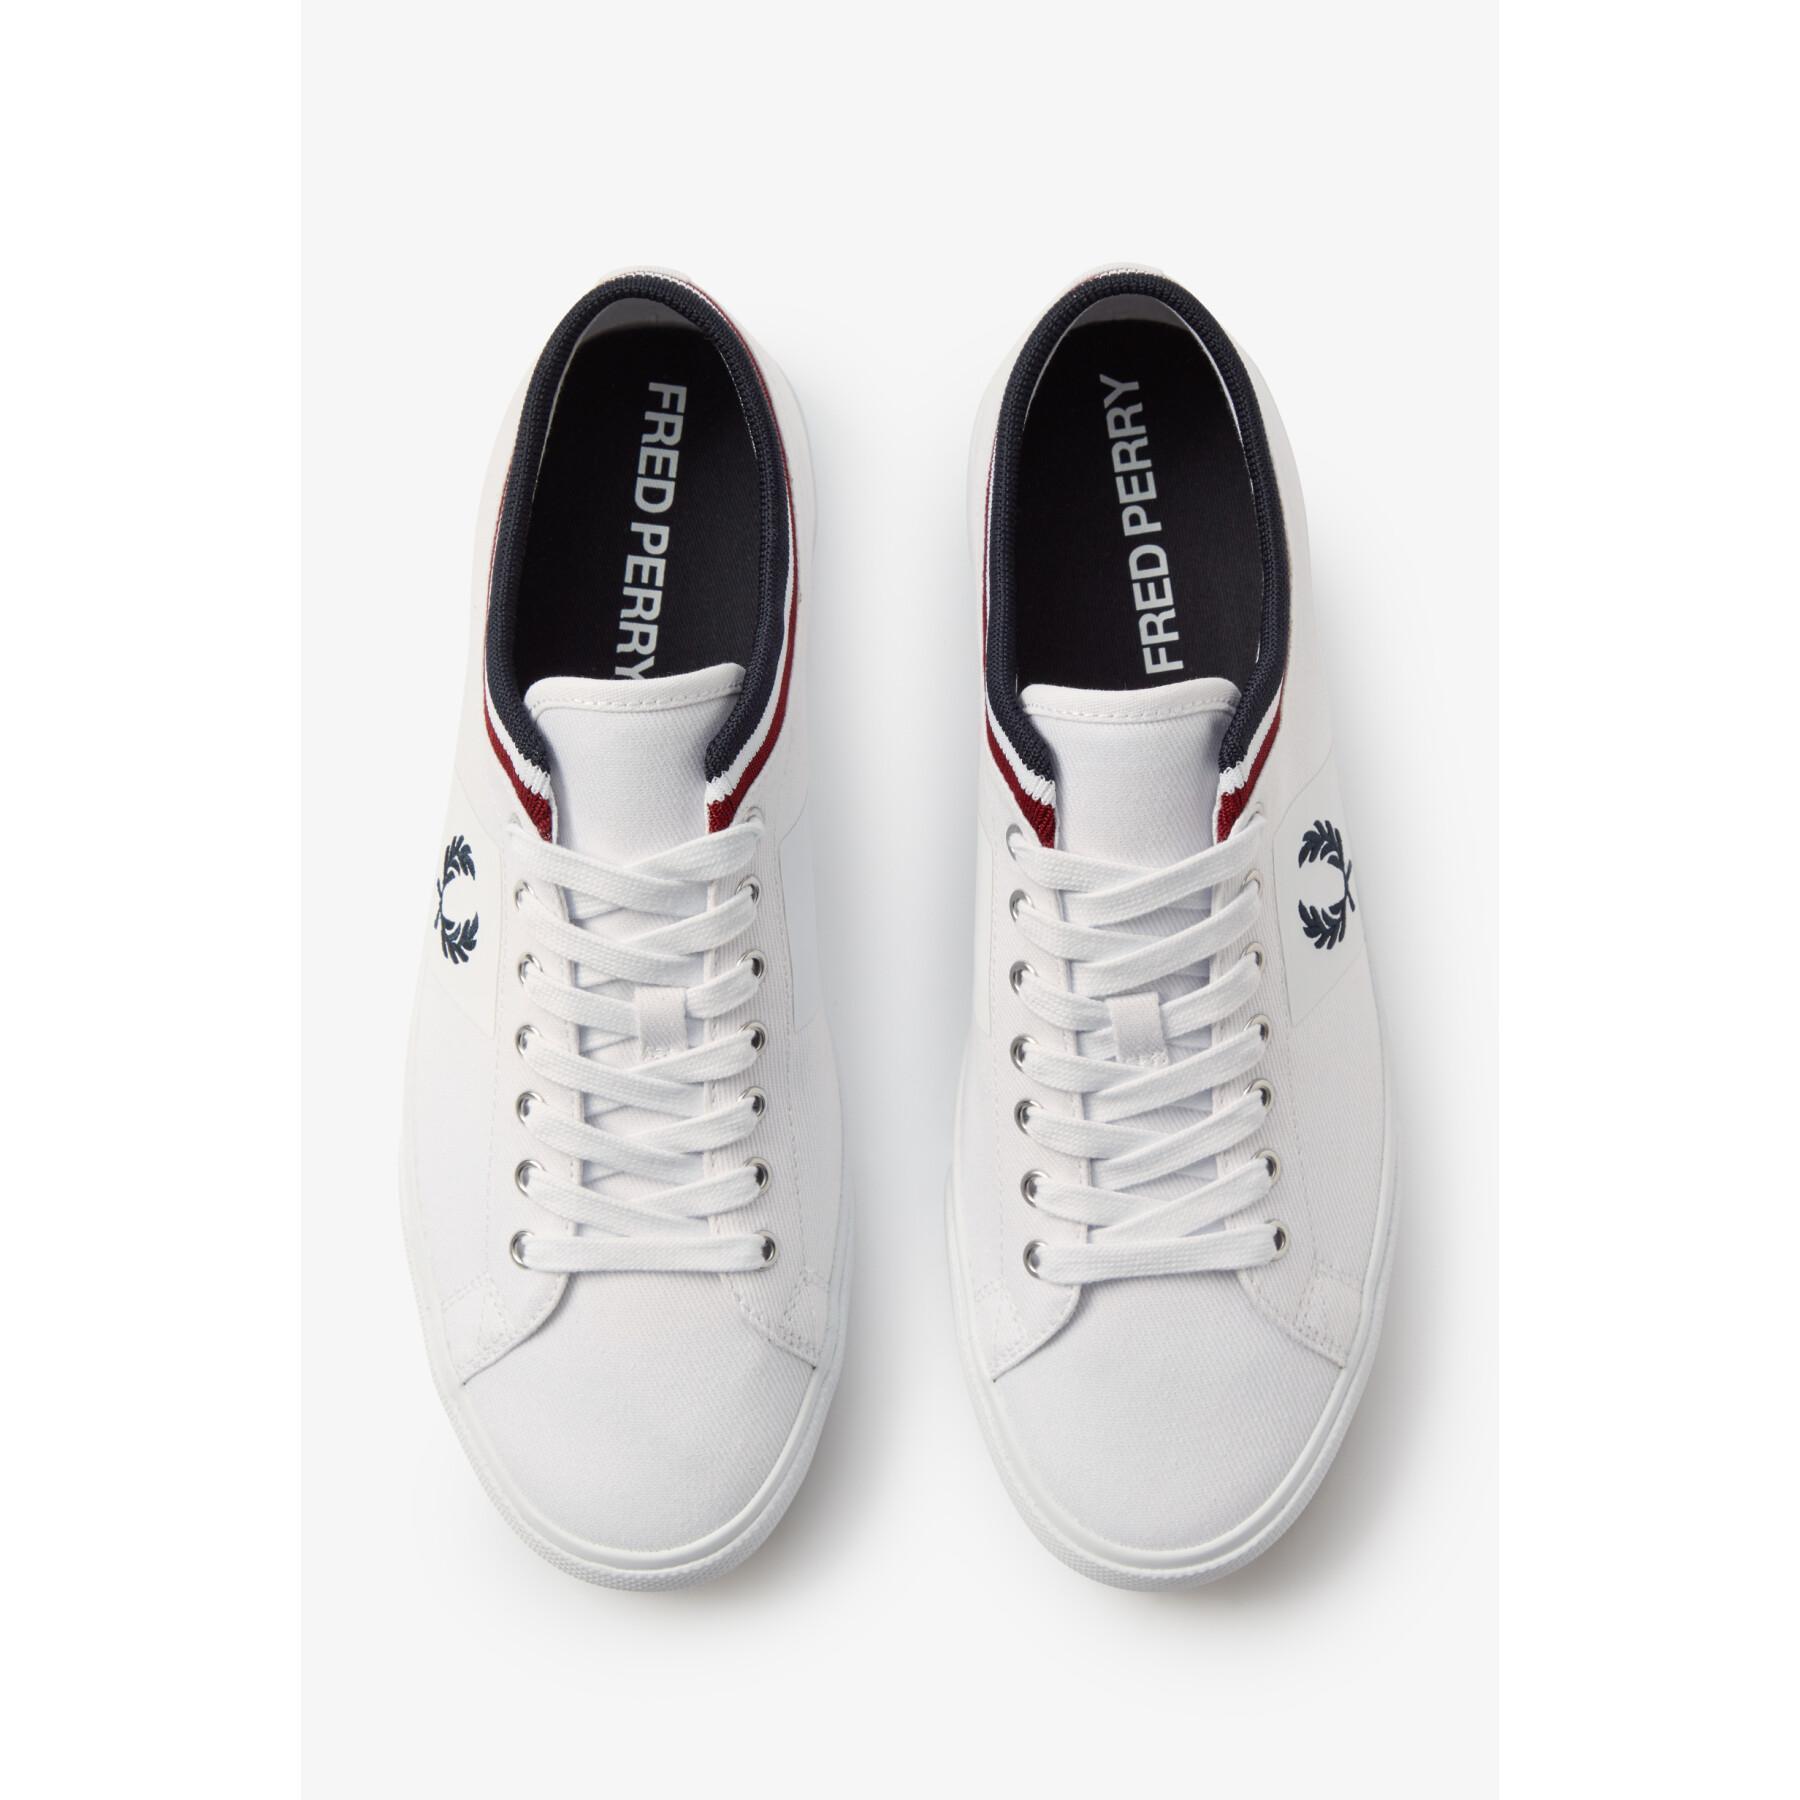 Formadores Fred Perry Underspin Tipped Cuff Twill